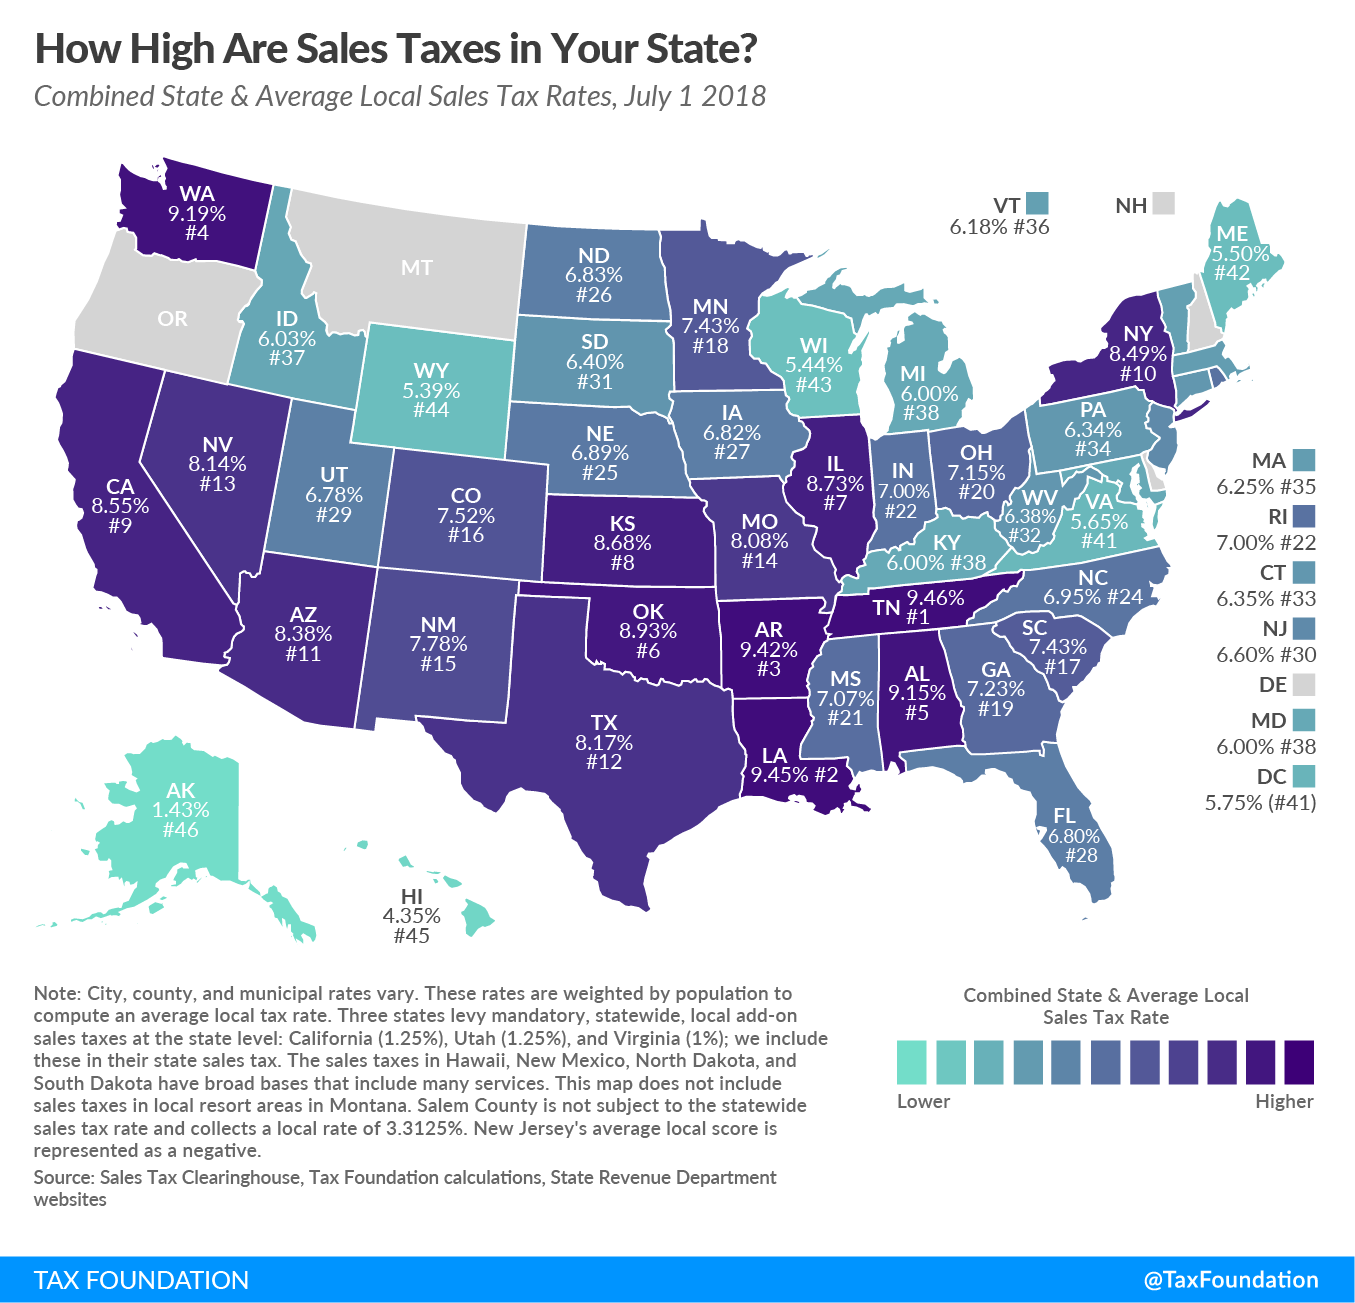 Combined state and average local sales tax rates, July 1, 2018